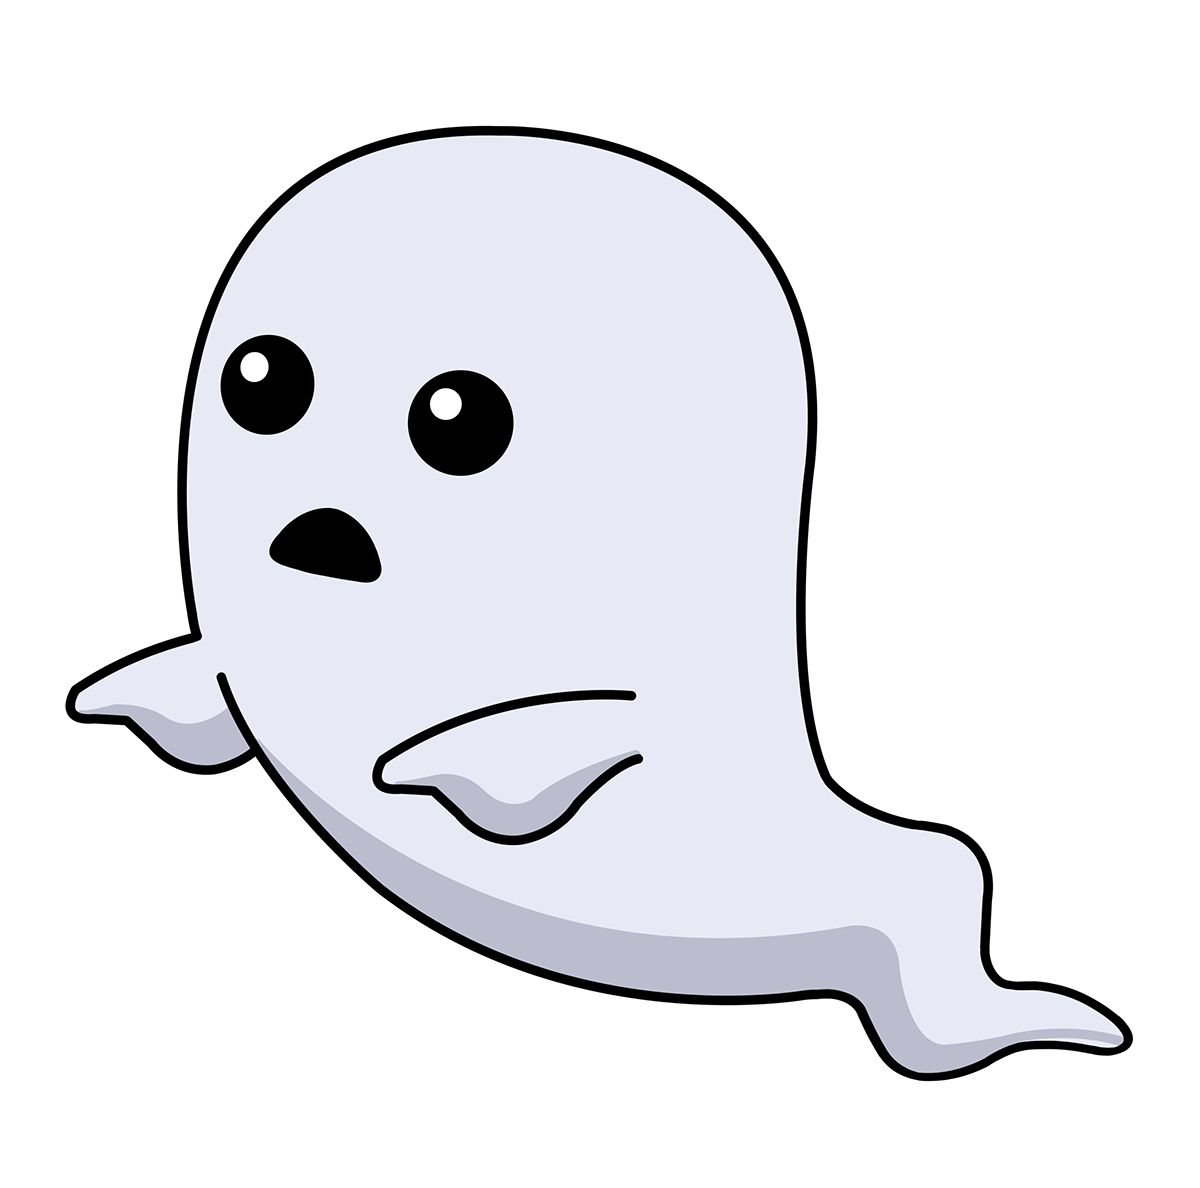 Free Ghostbuster Ghost Cliparts, Download Free Ghostbuster Ghost